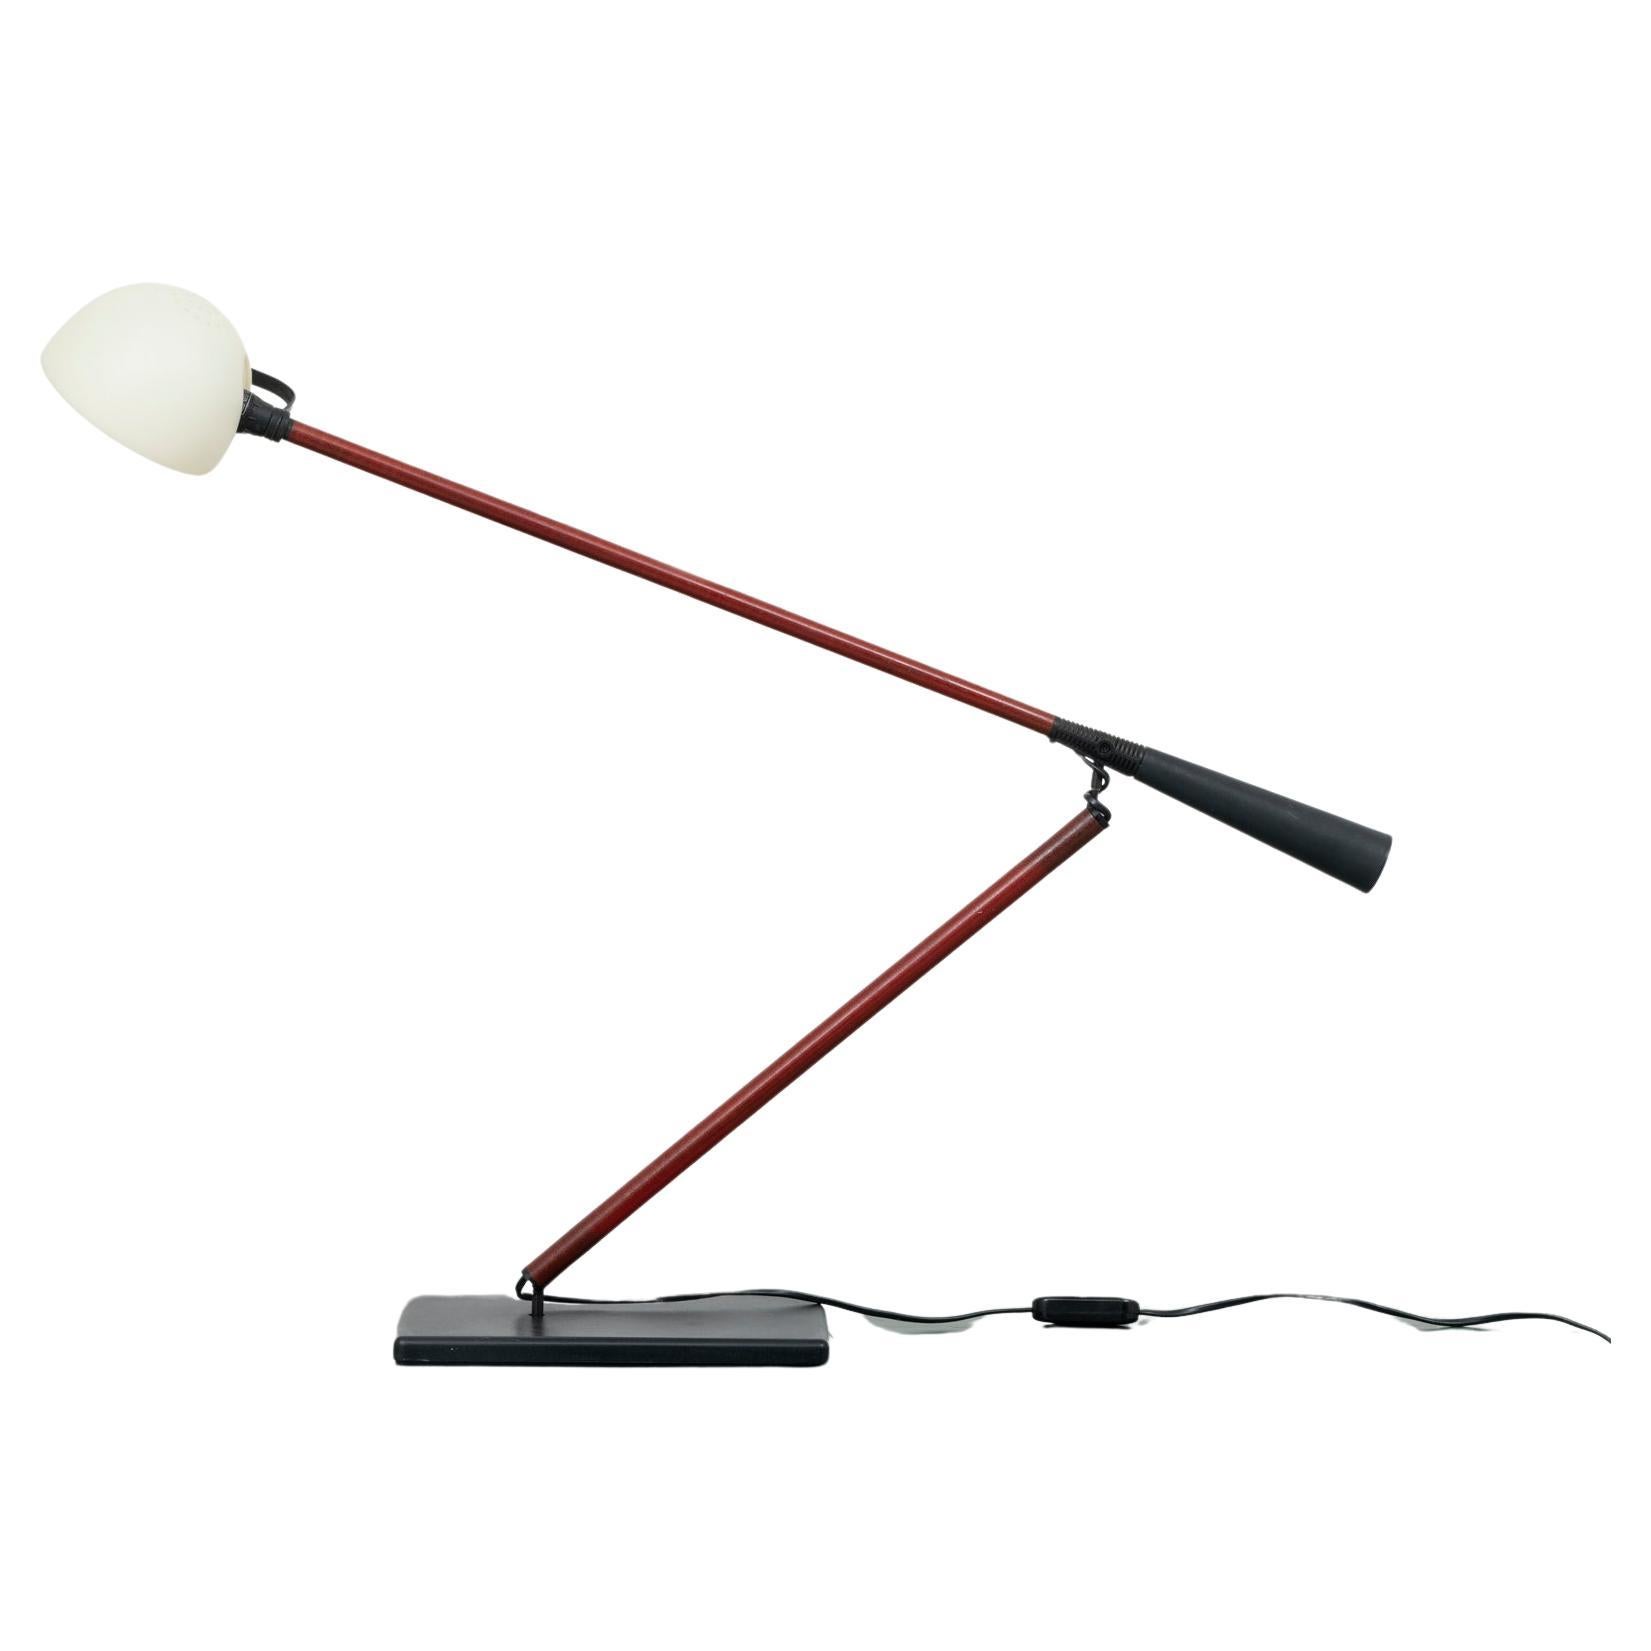  Mod. 613 Large Articulating Table Lamp by Paolo Rizzatto for Arteluce, 1975